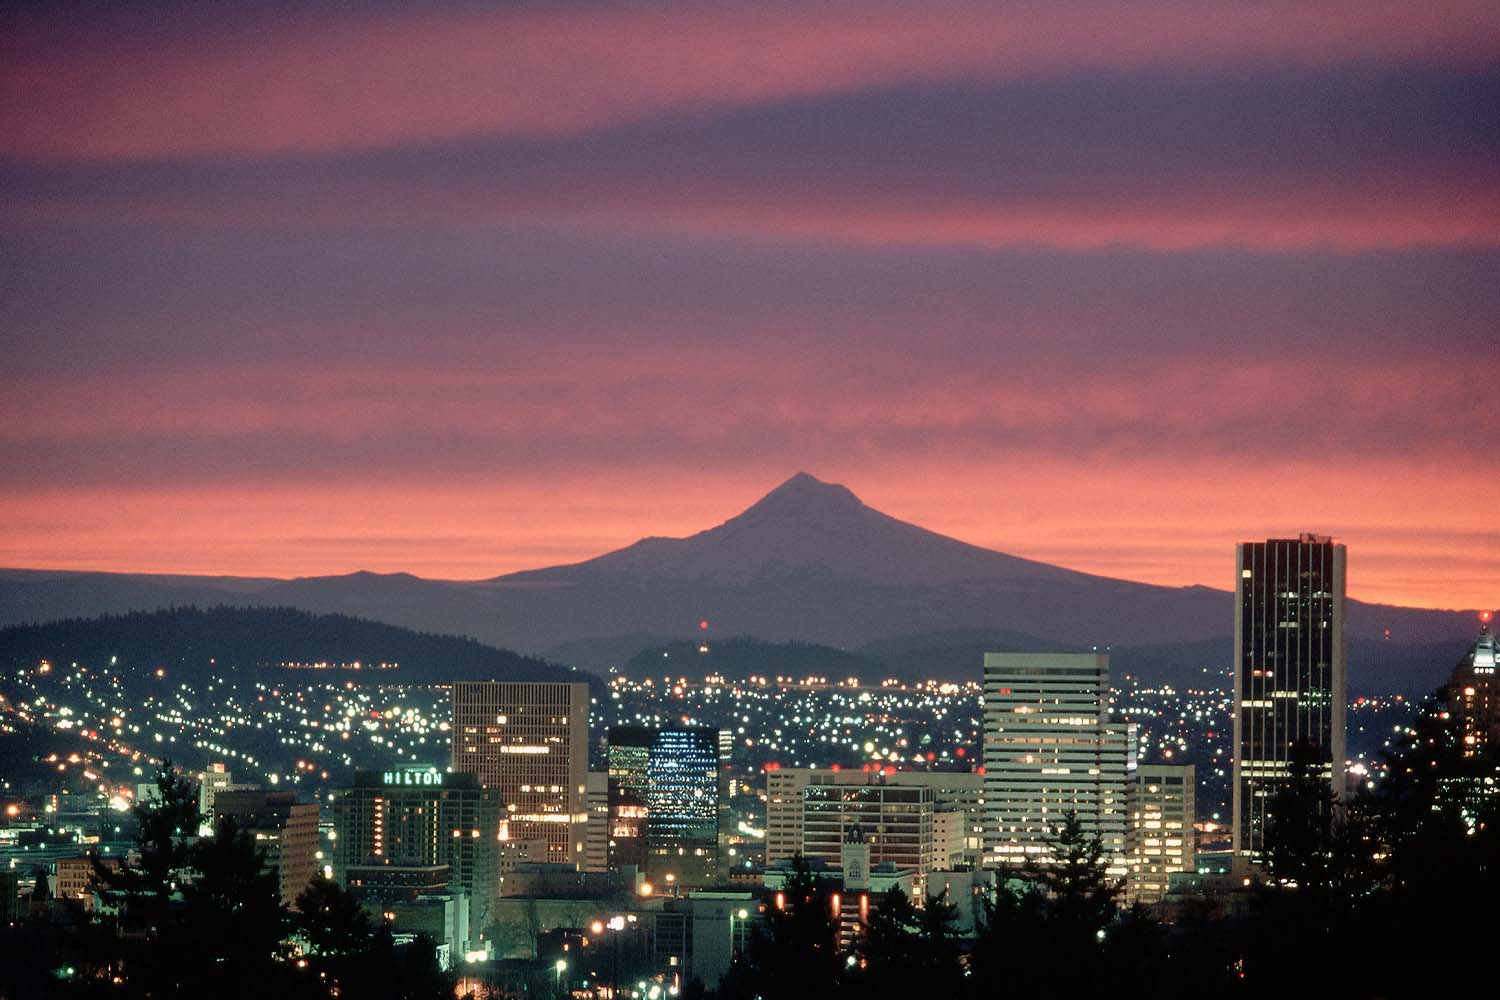 The sunrise casts a pink glow over the city of Portland and Mount Hood.